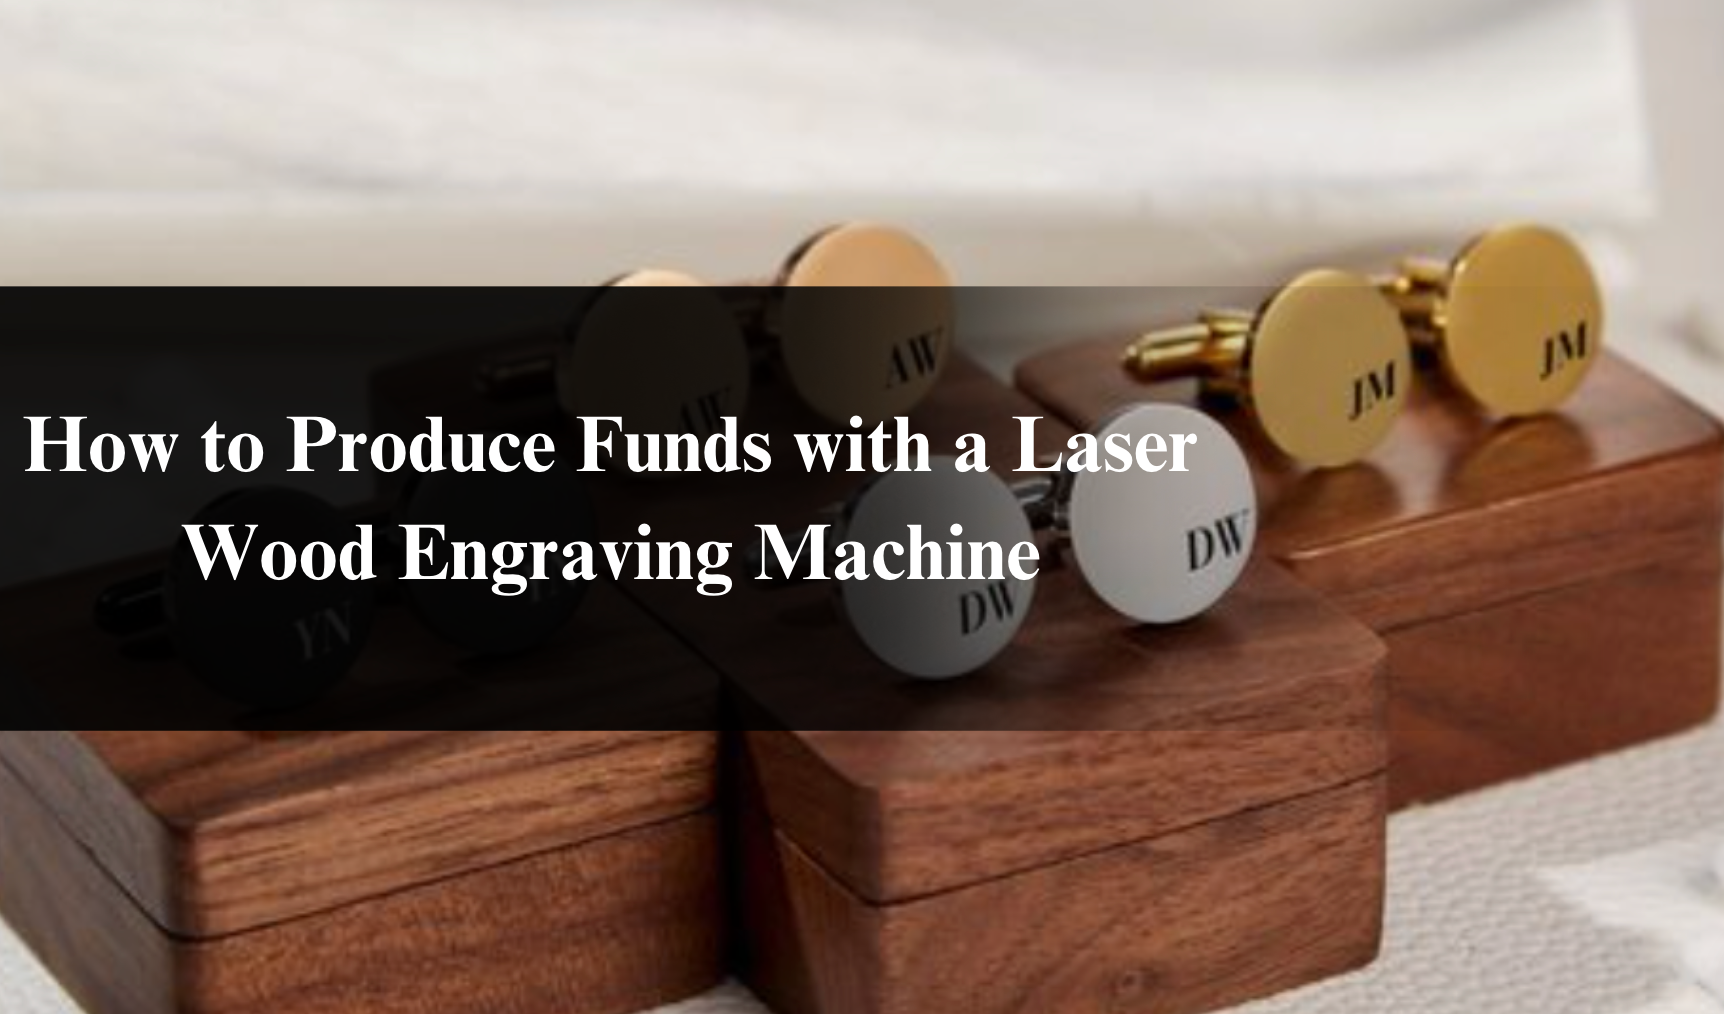 How to Produce Funds with a Laser Wood Engraving Machine